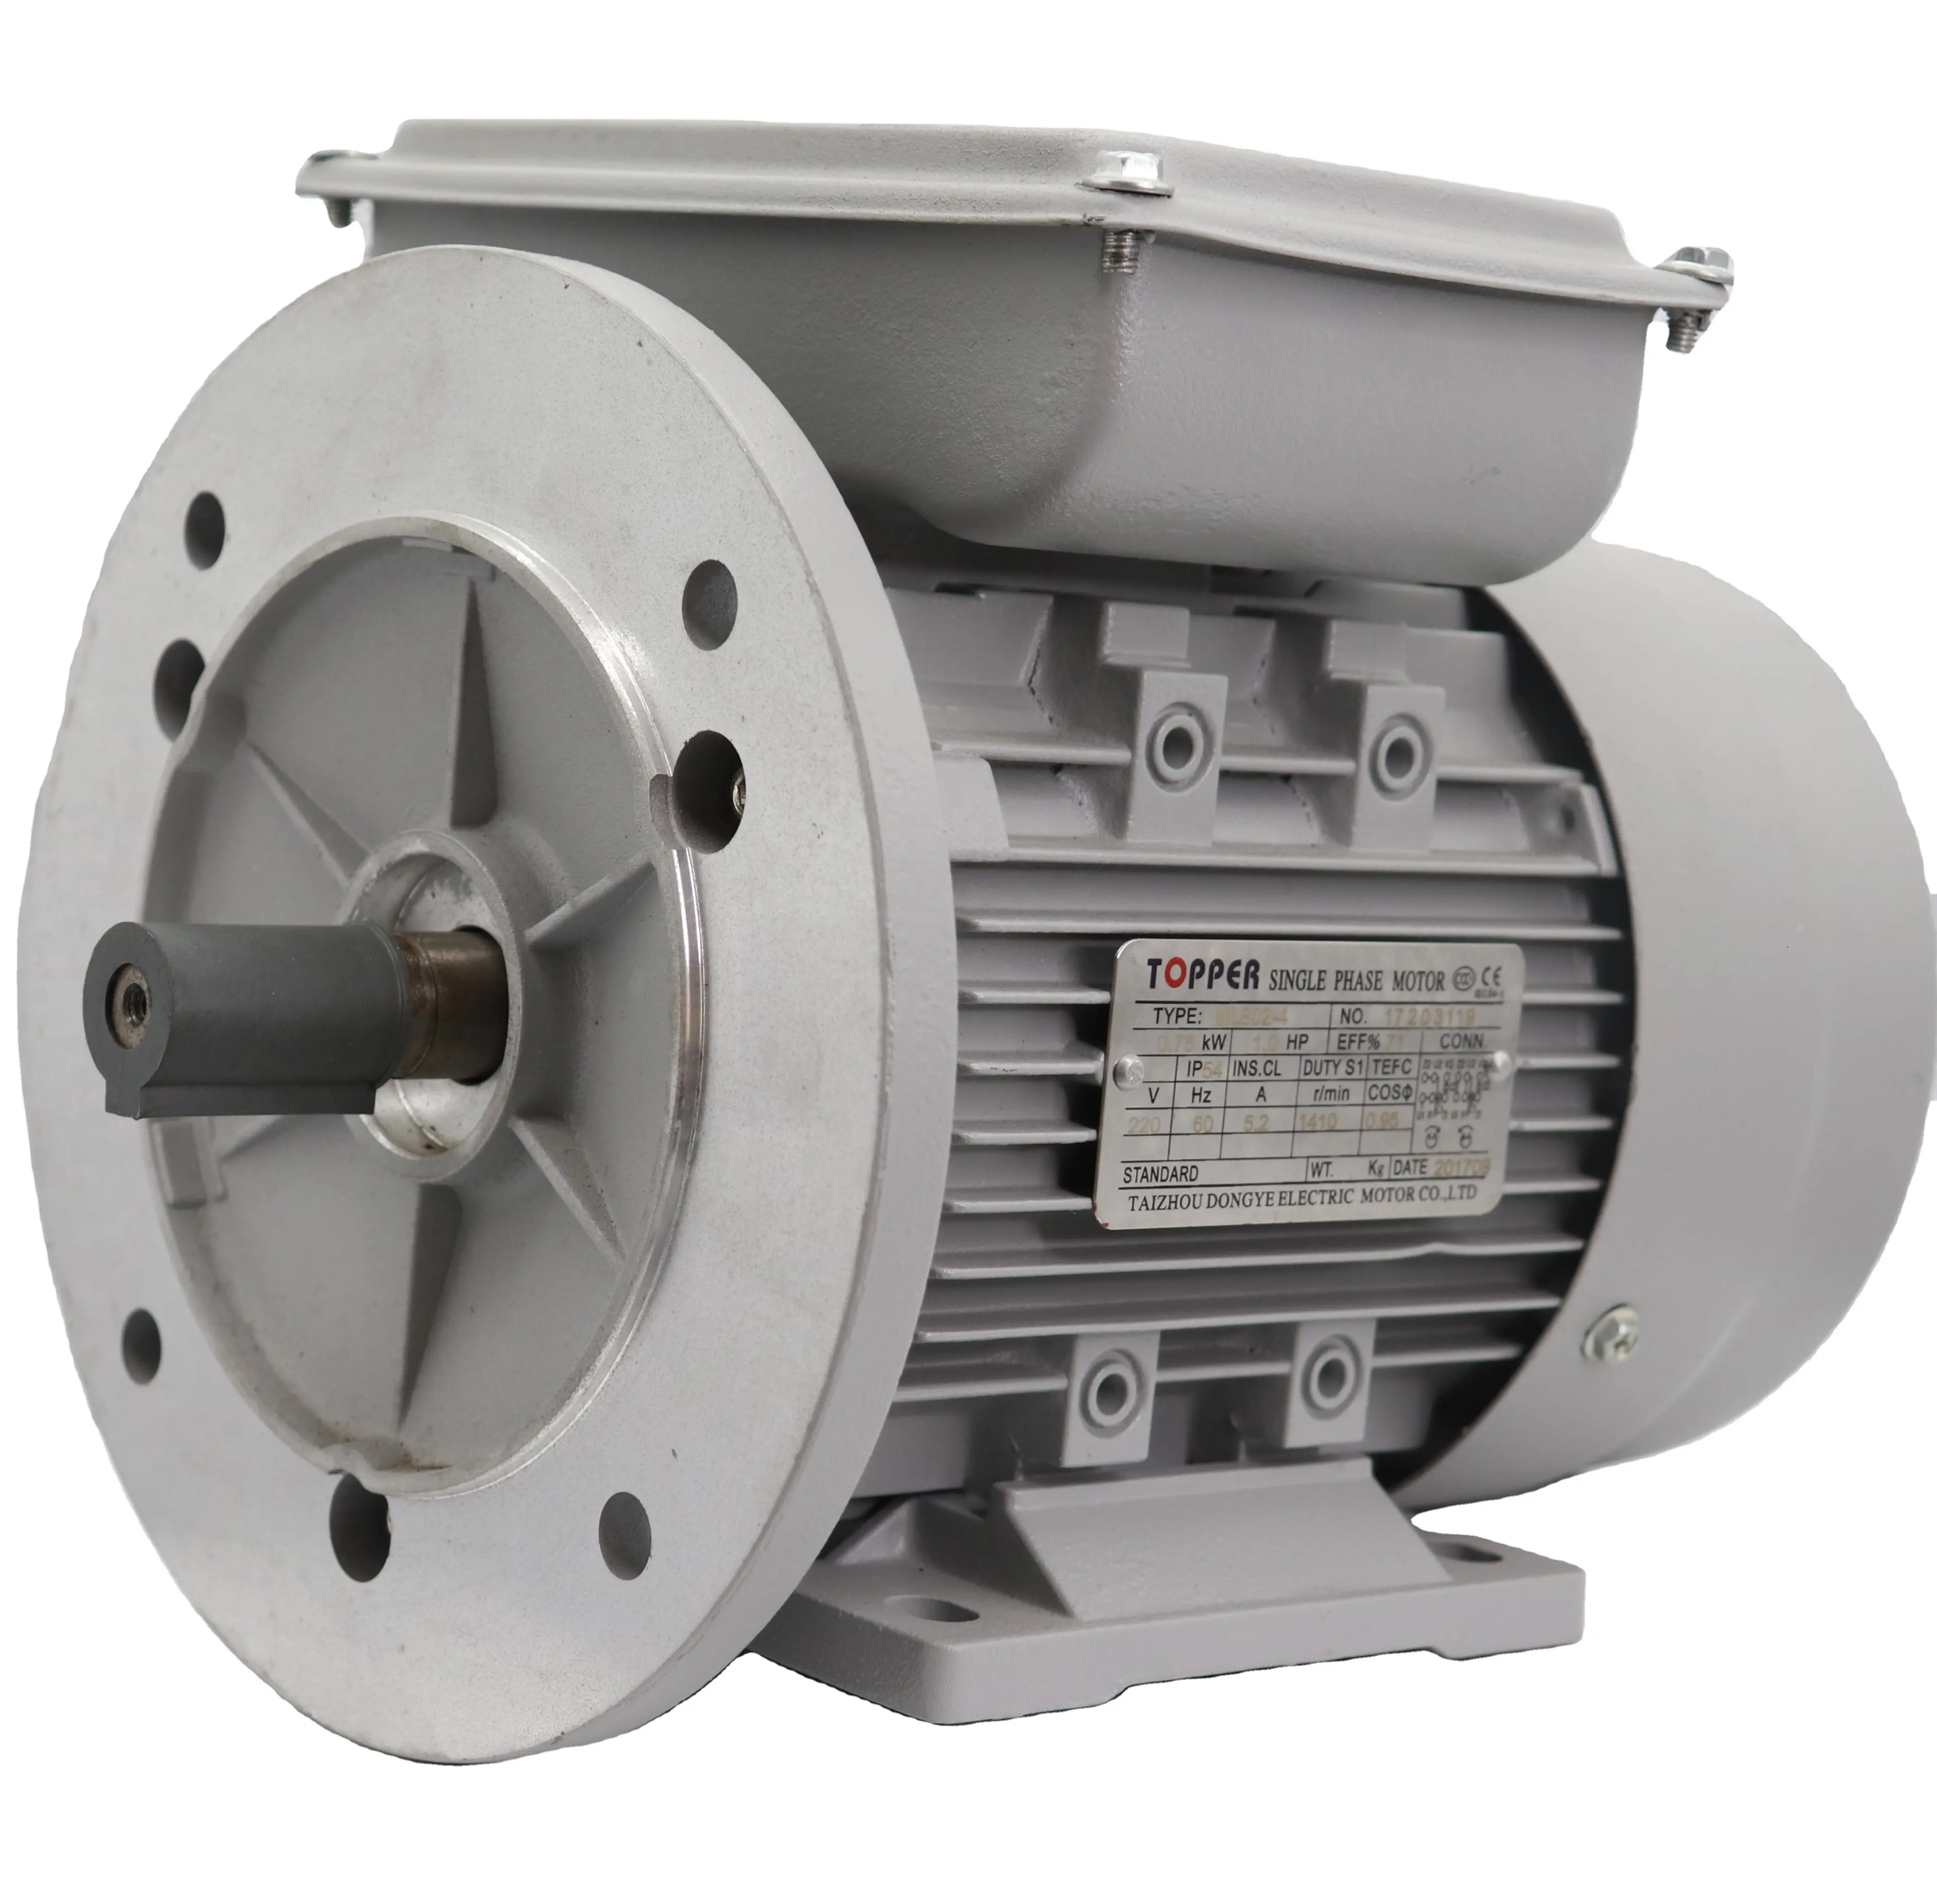 Permanent magnet synchronous frequency conversion motor